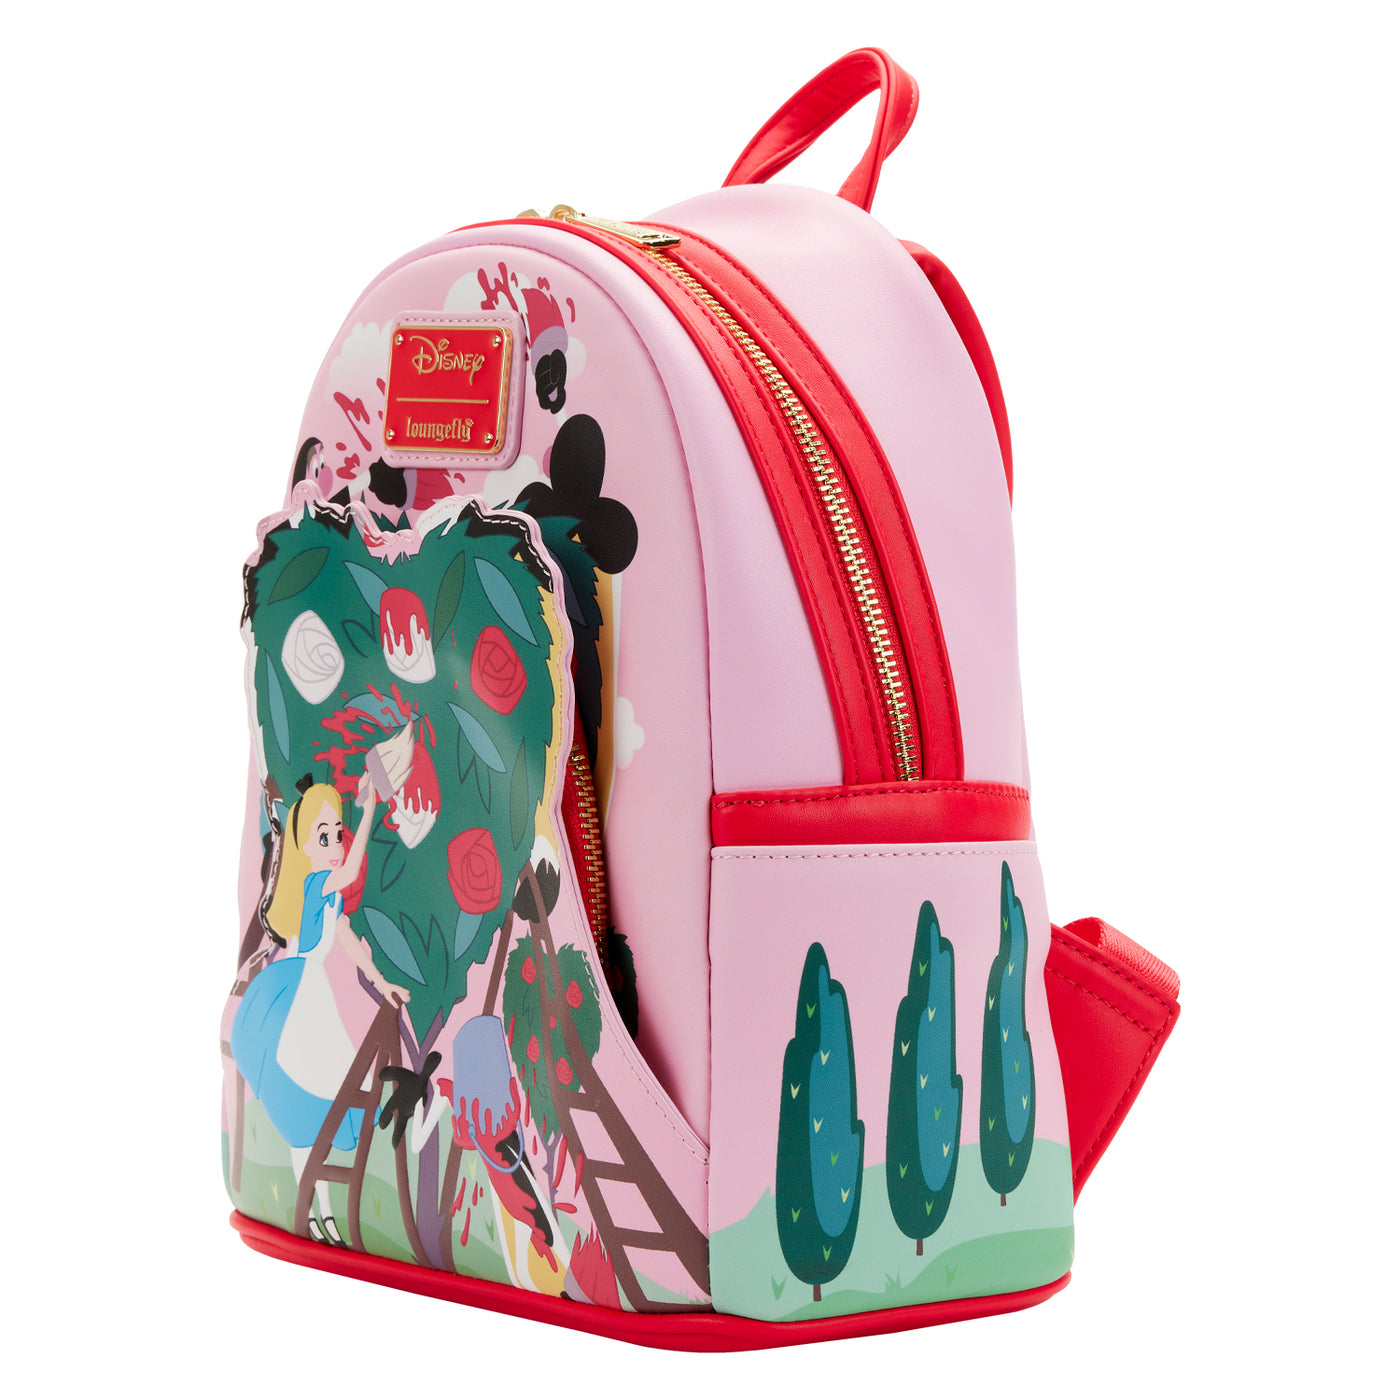 Disney Alice in Wonderland Painting the Roses Red Mini Backpack